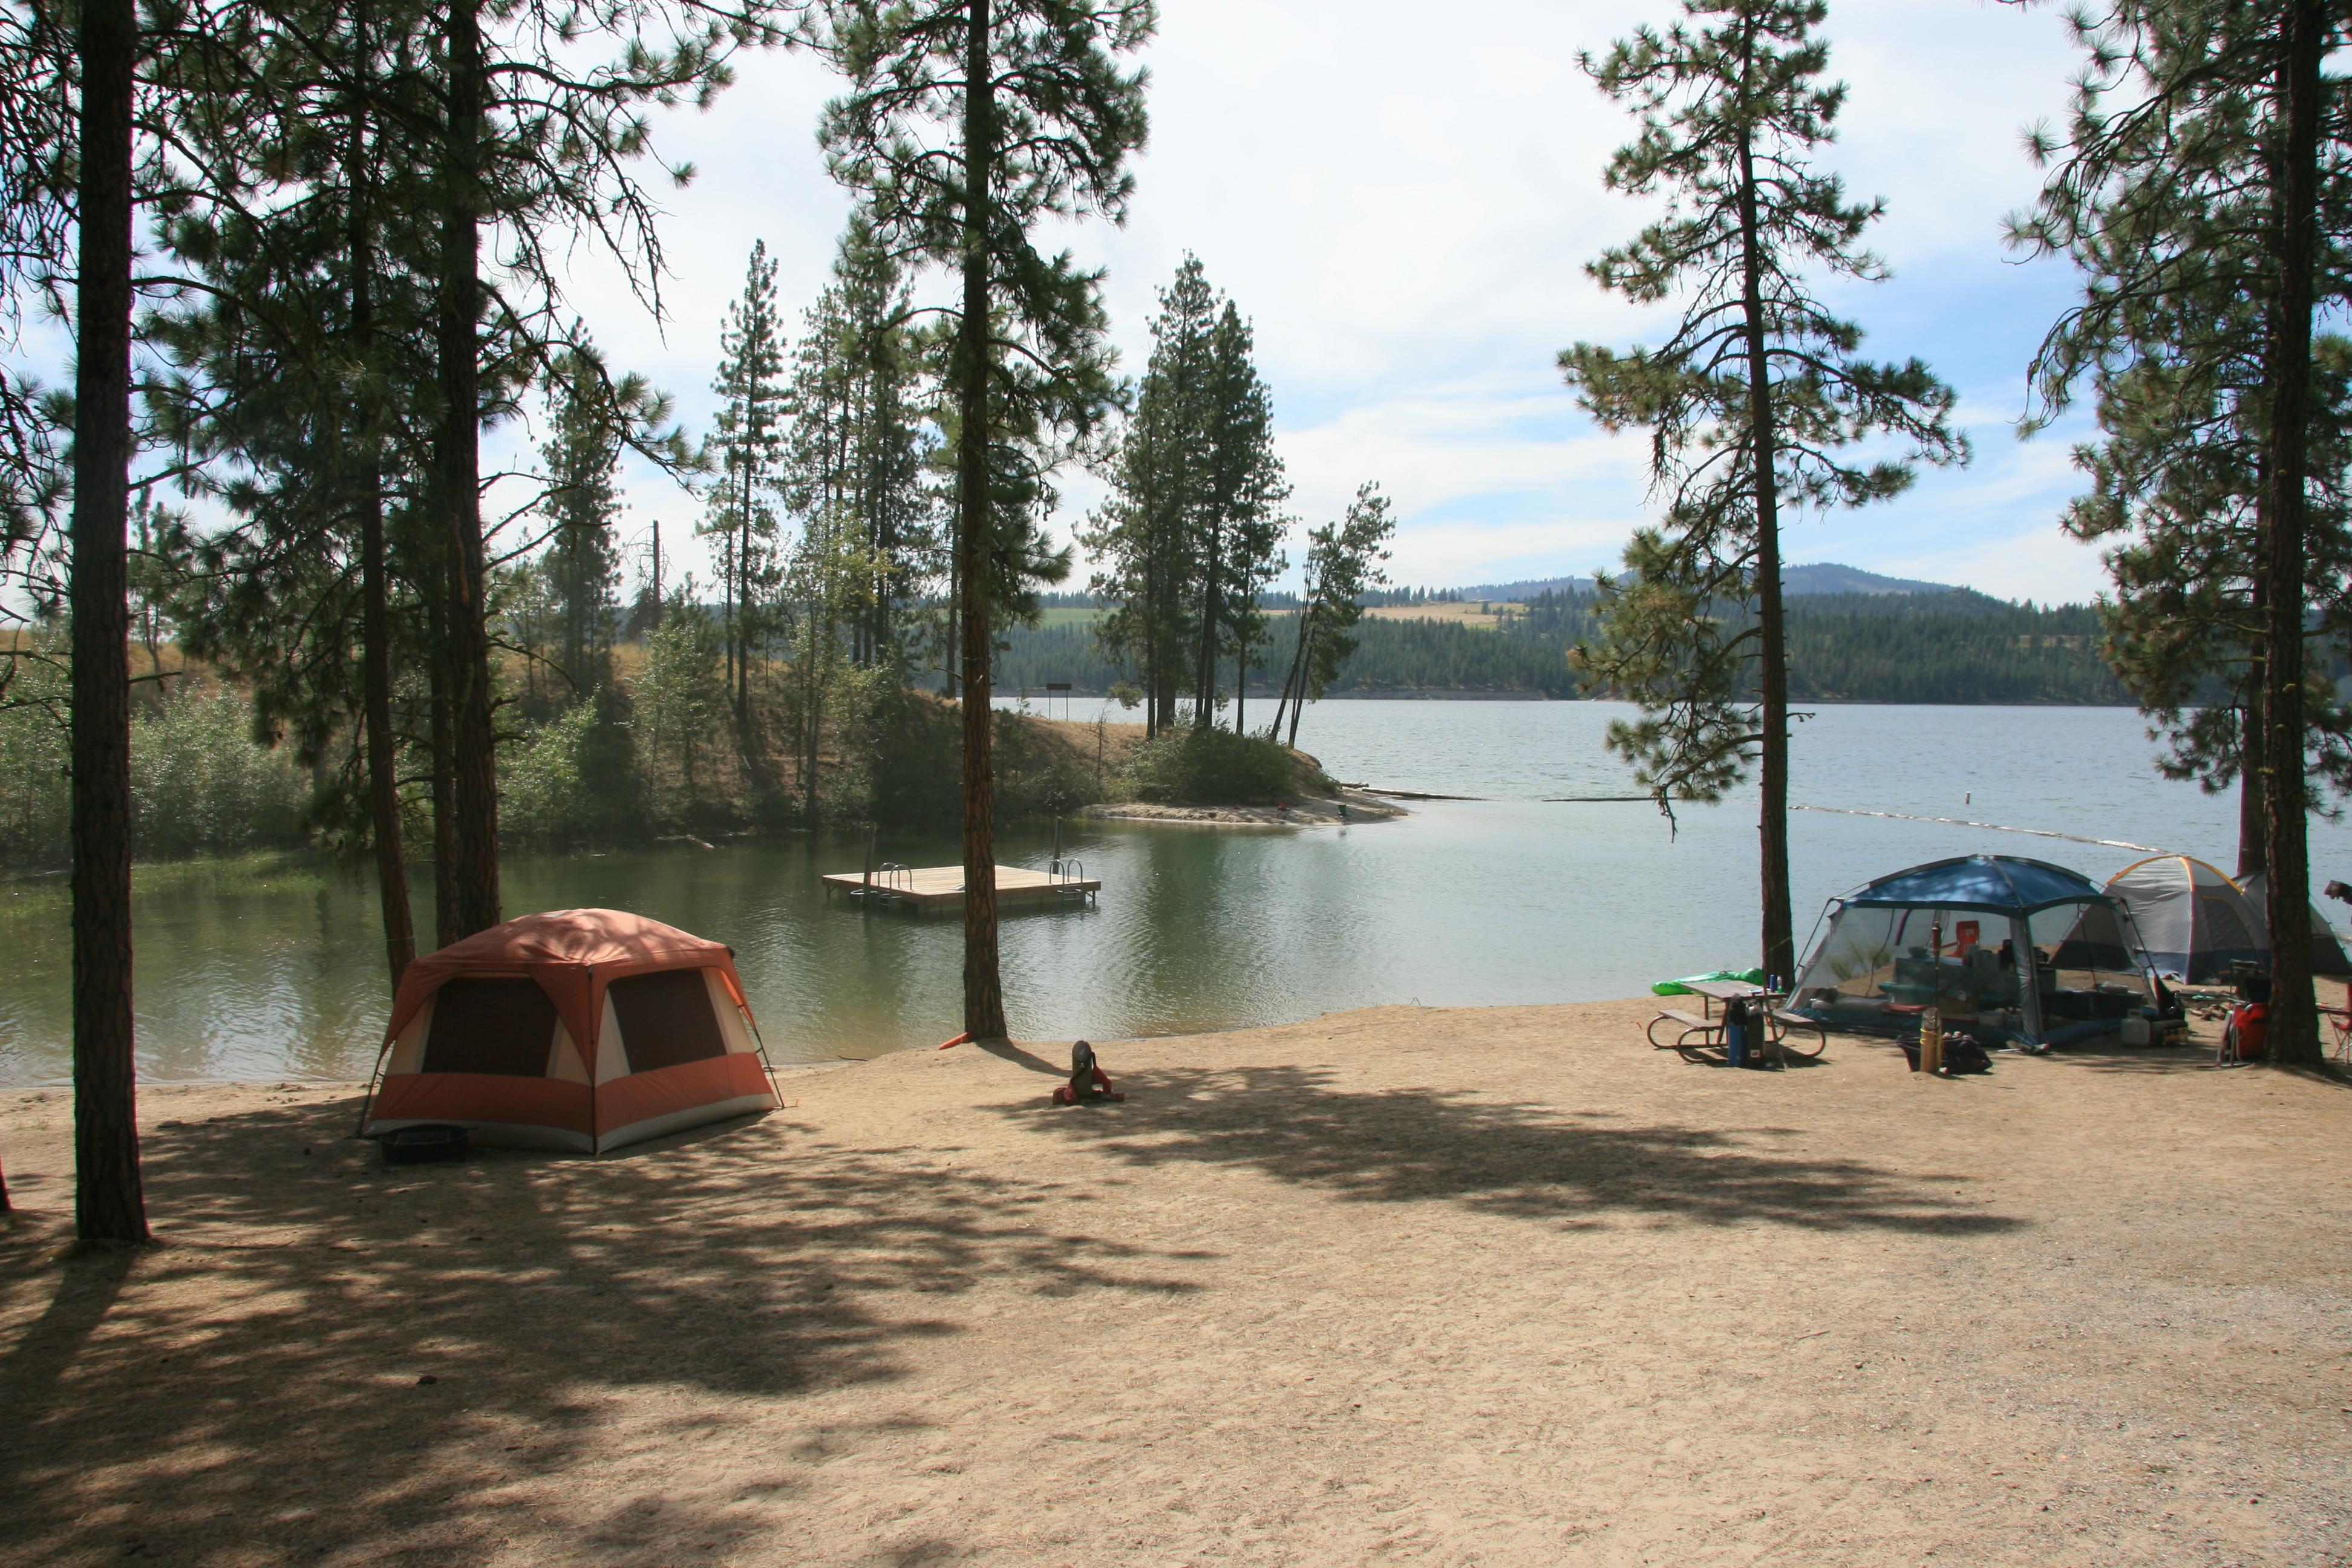 Tents are set up in campsites along the shore of the lake with a swim dock just beyond.